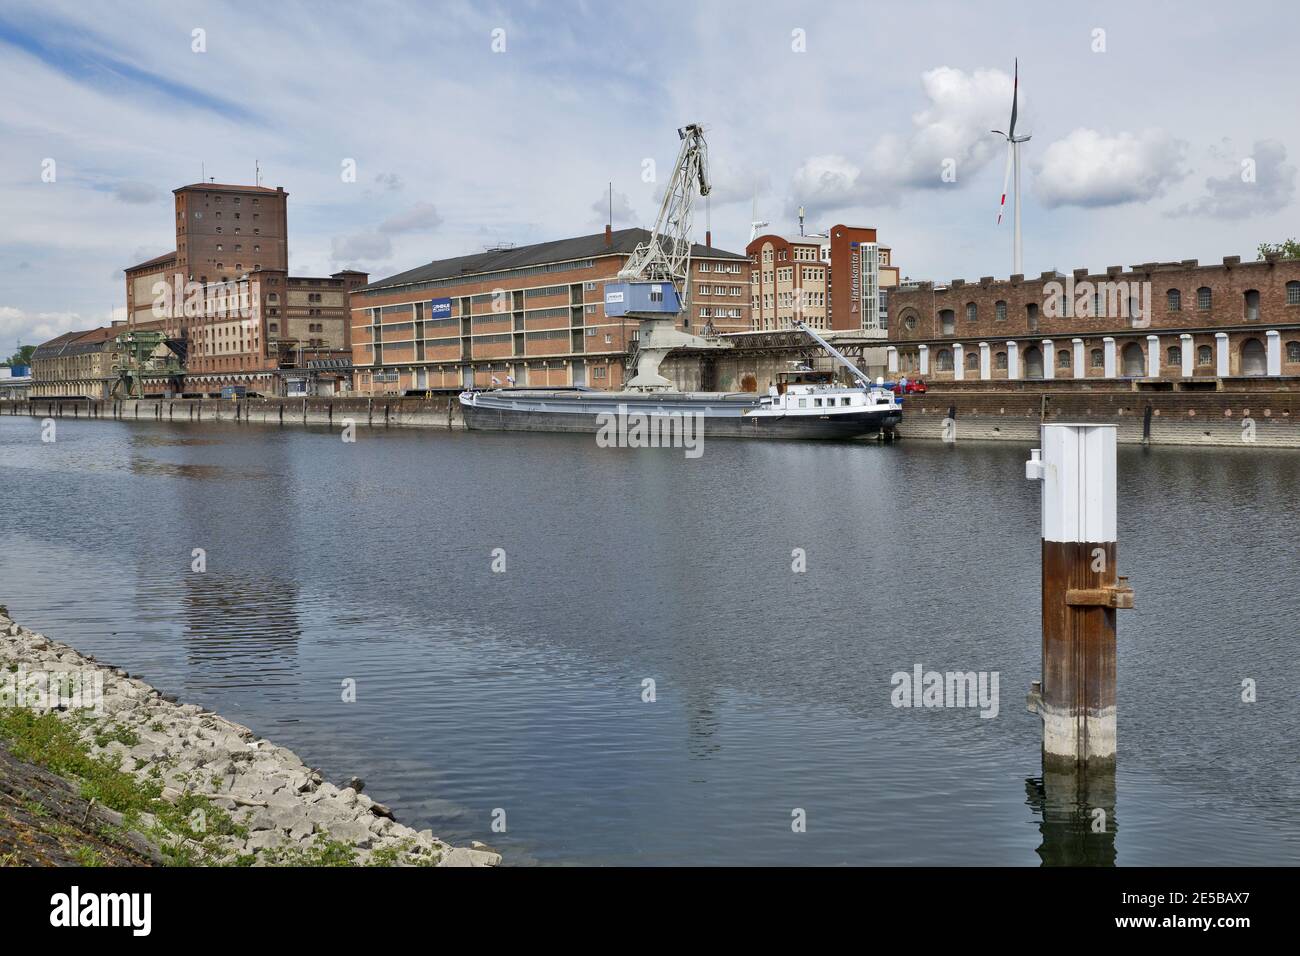 Karlsruhe, Germany: port of Karlsruhe with river rhine, ships, cranes and storage buildings Stock Photo